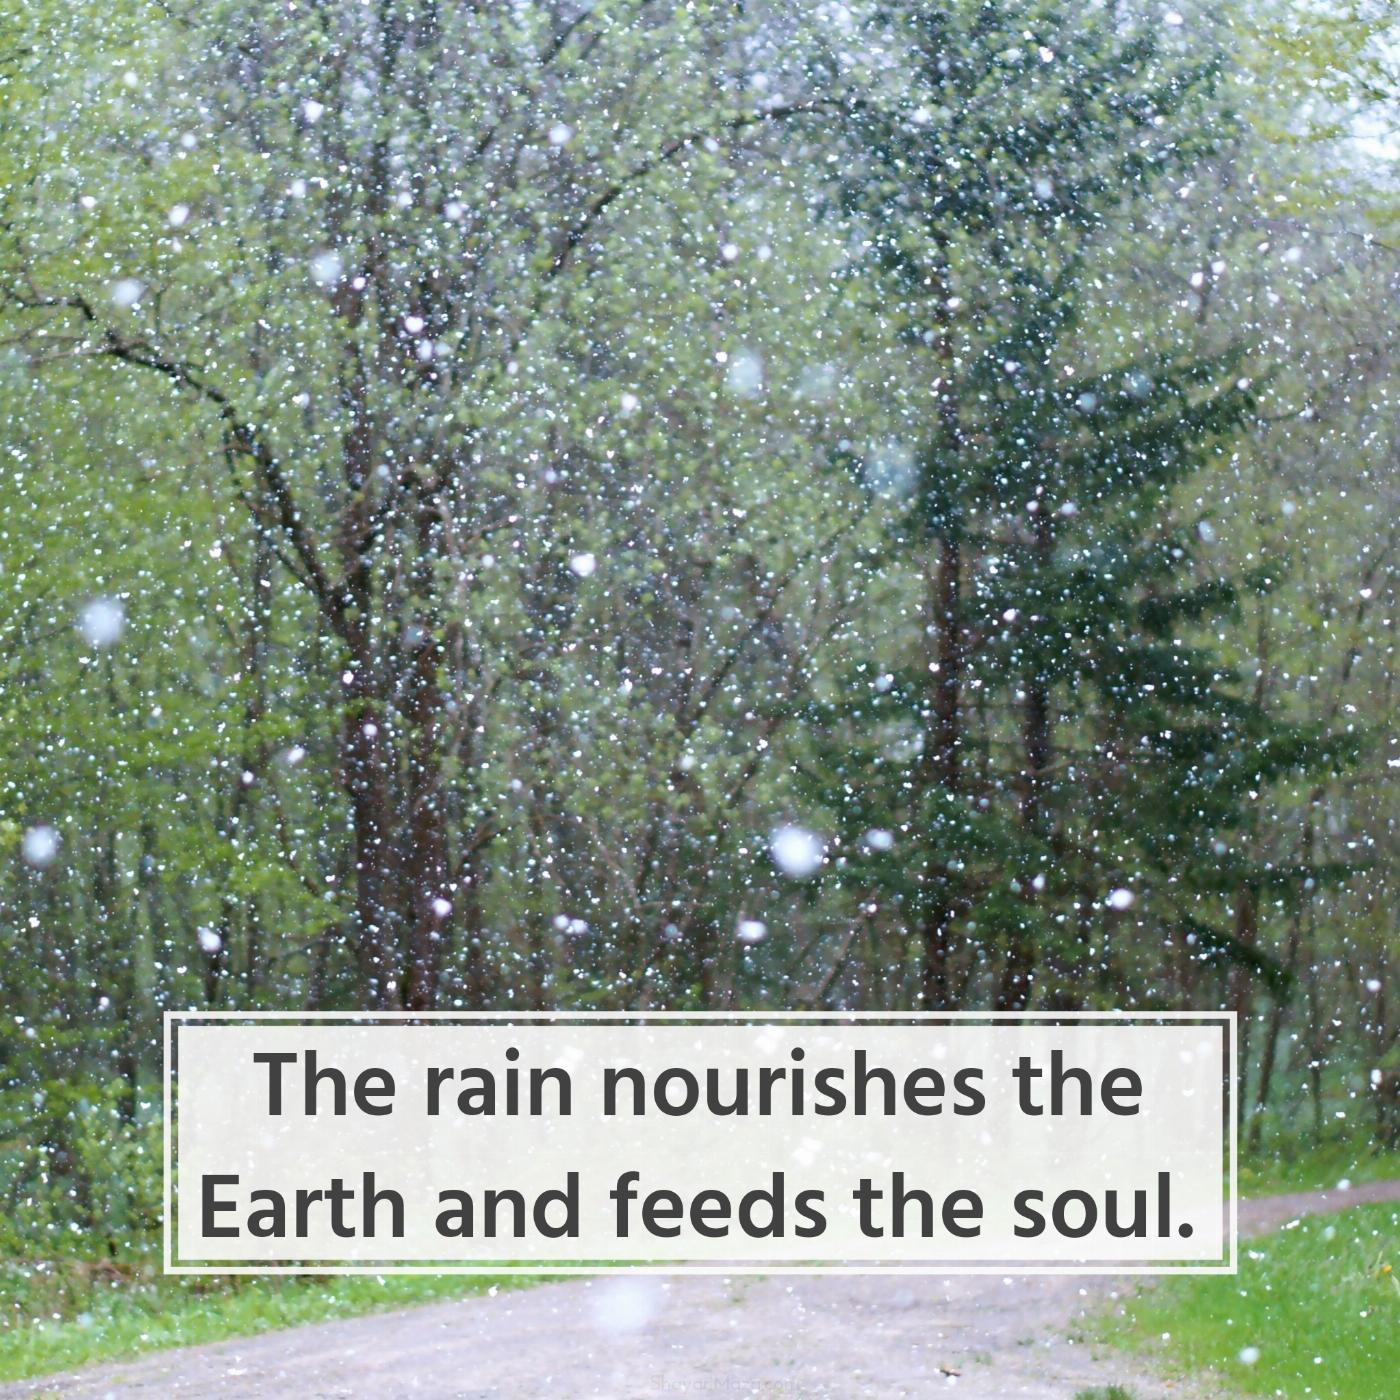 The rain nourishes the Earth and feeds the soul